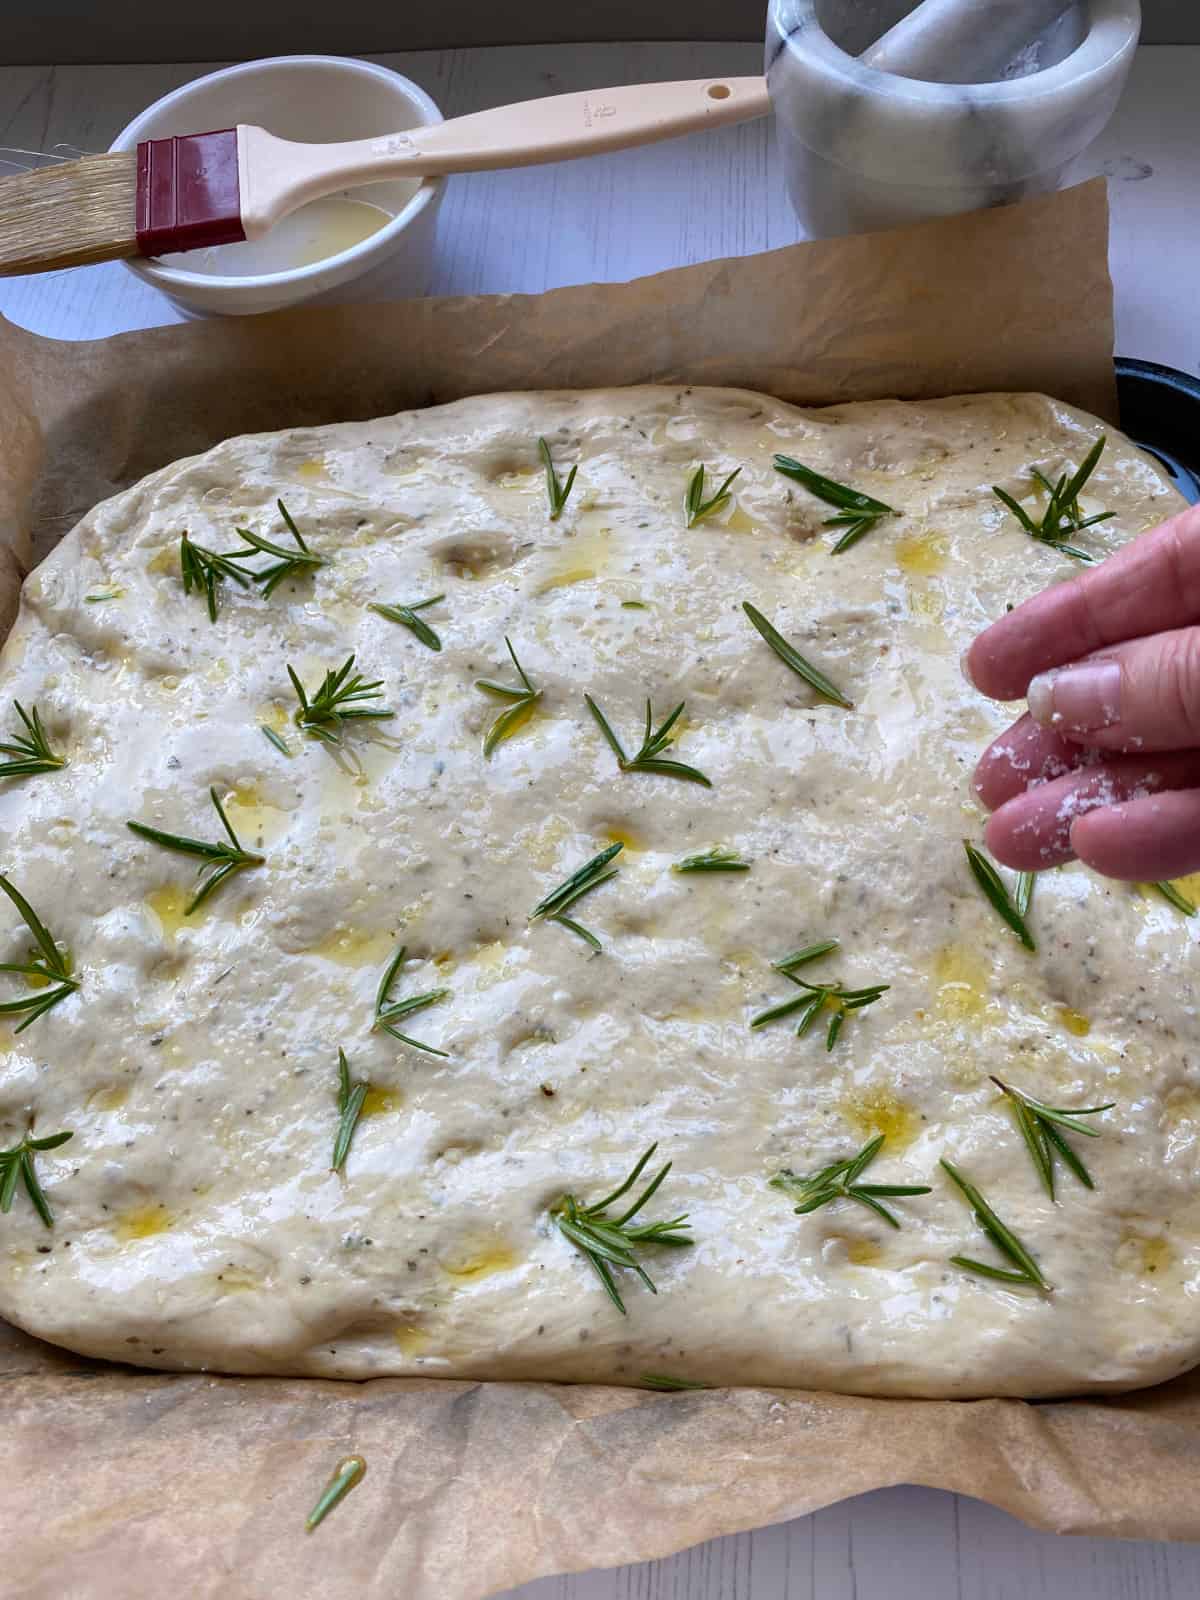 Adding the oil, salt and Rosemary to the top of the focaccia dough.